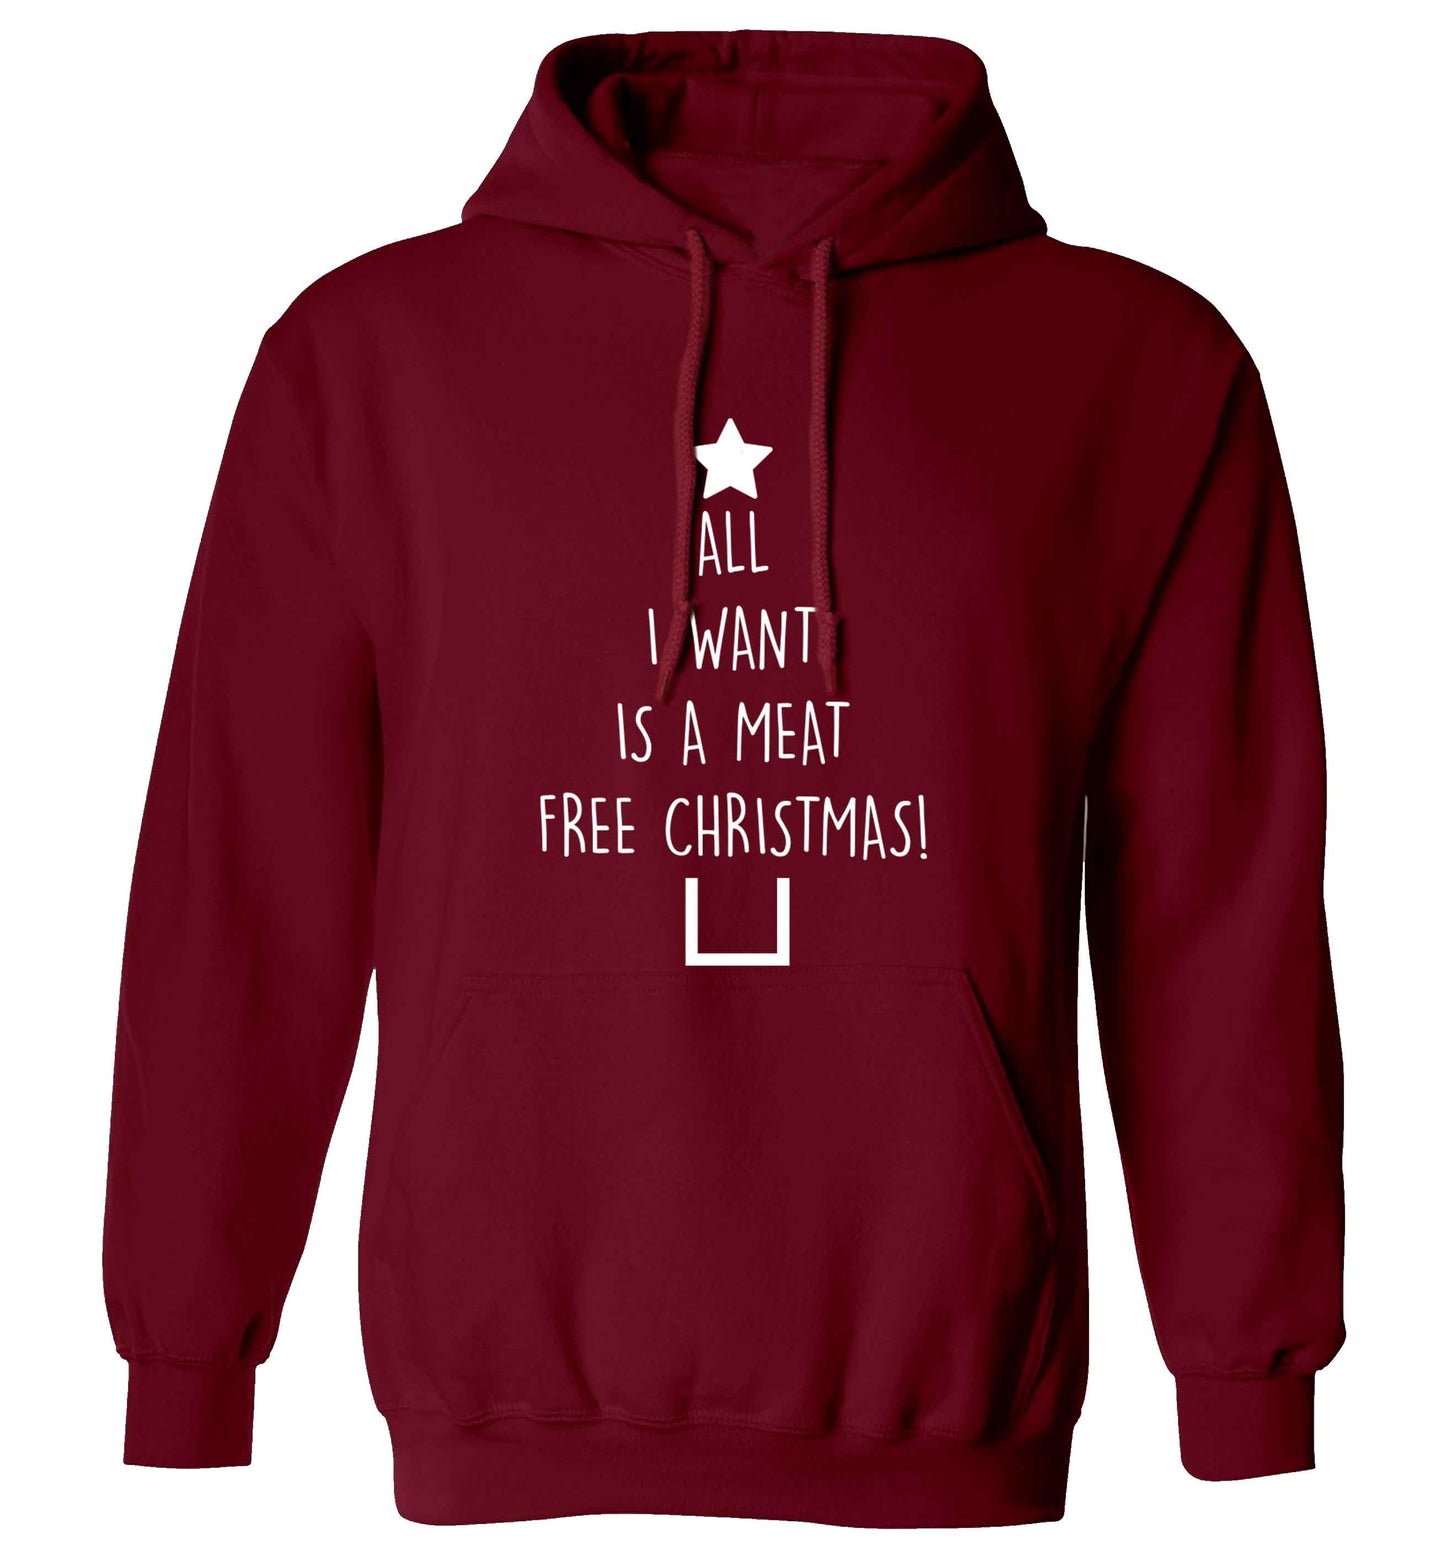 All I want is a meat free Christmas adults unisex maroon hoodie 2XL